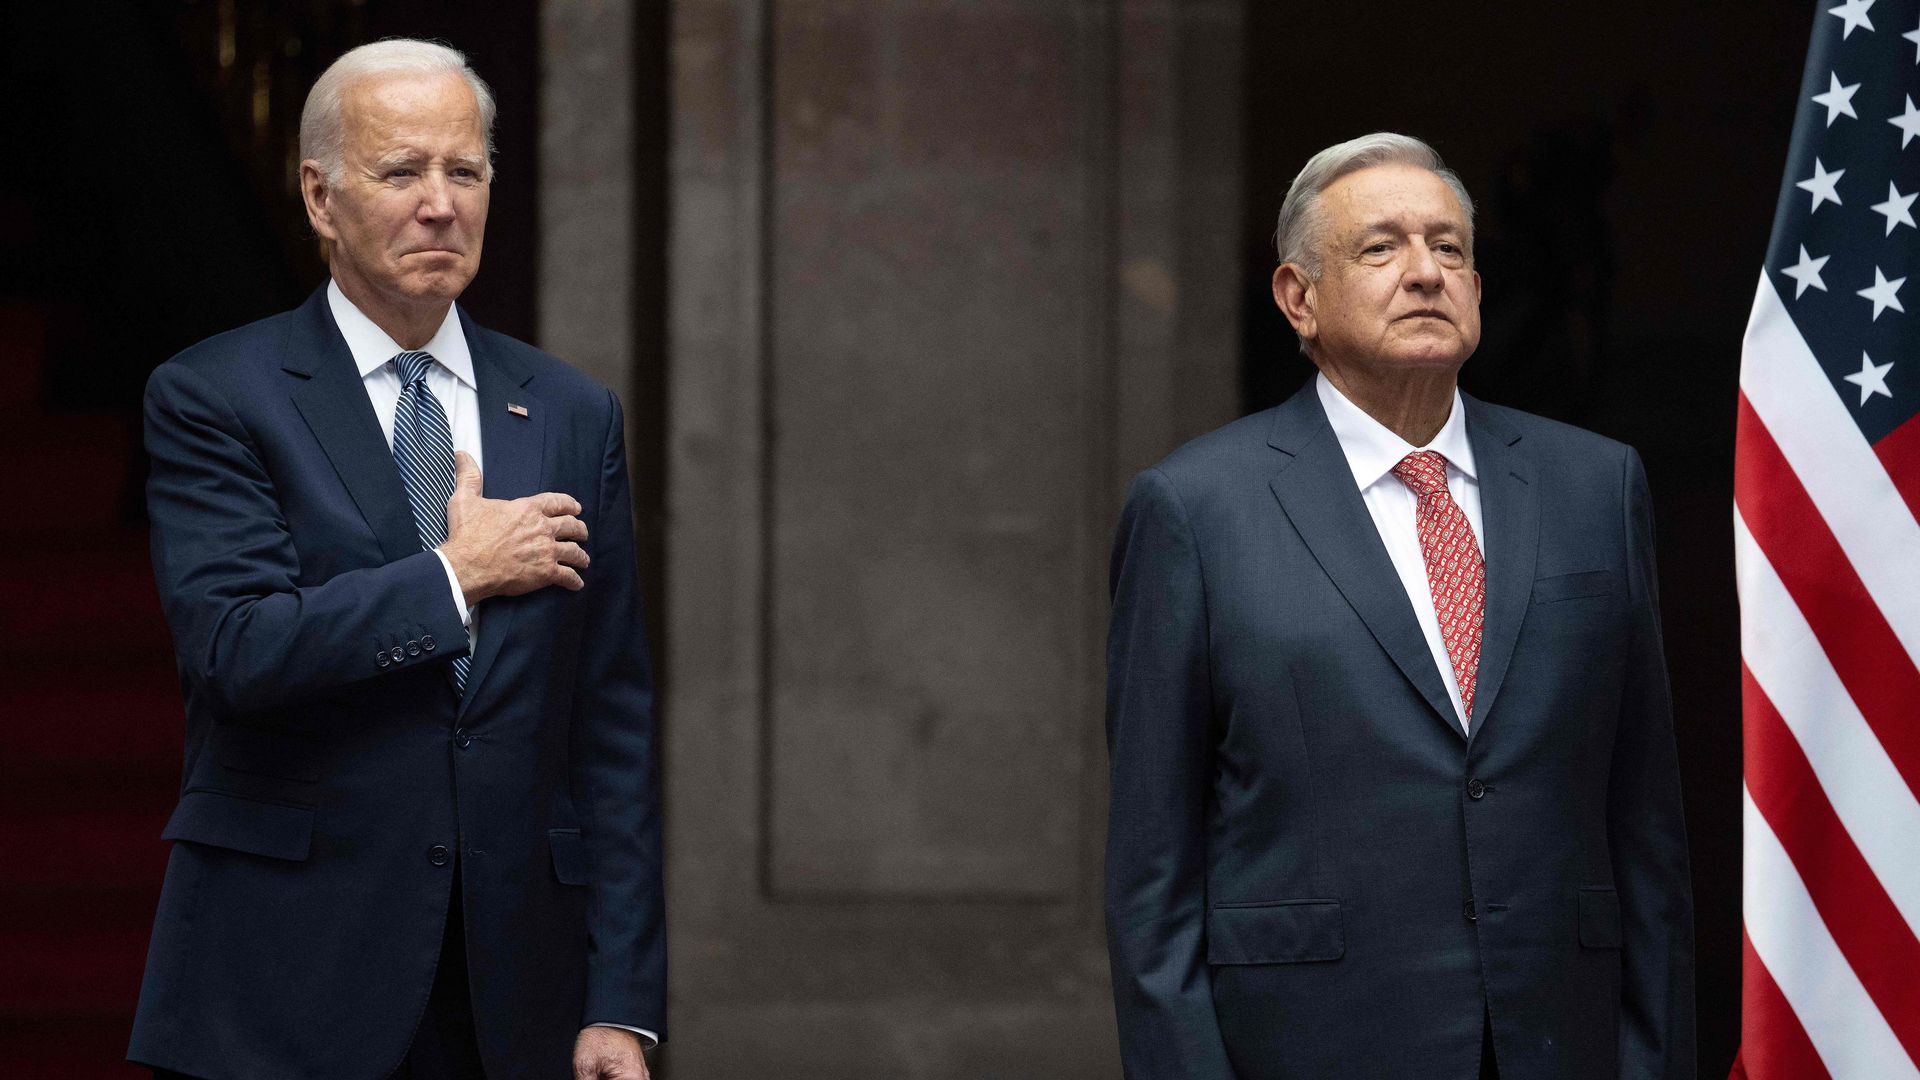 President Biden holds his hand to his chest and Mexican President Andres Manuel Lopez Obrador, who is standing next to him, stands at attention